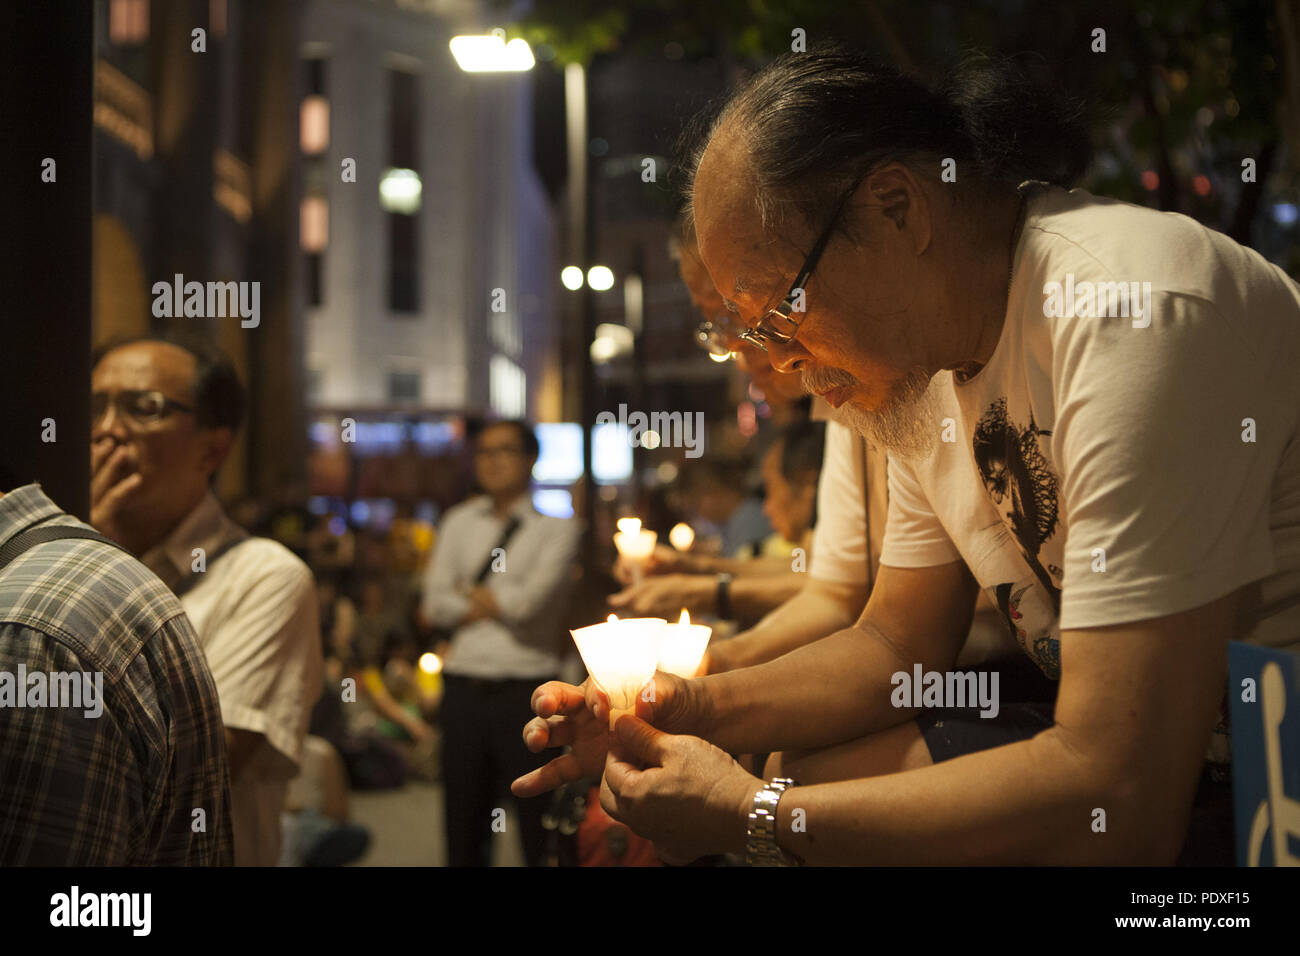 Hong Kong, Hong Kong, Hong Kong. 29th June, 2017. A Hong Kong man seen mourning the death of Liu Xiaobo.A vigil is held for Nobel laureate Liu Xiaobo, who died in Chinese custody the night before. No such vigils were allowed in China. Here in Hong Kong, dozens gathered outside the statehouse holding candles and signs commemorating Xiaobo. Credit: Viola Gaskell/SOPA Images/ZUMA Wire/Alamy Live News Stock Photo